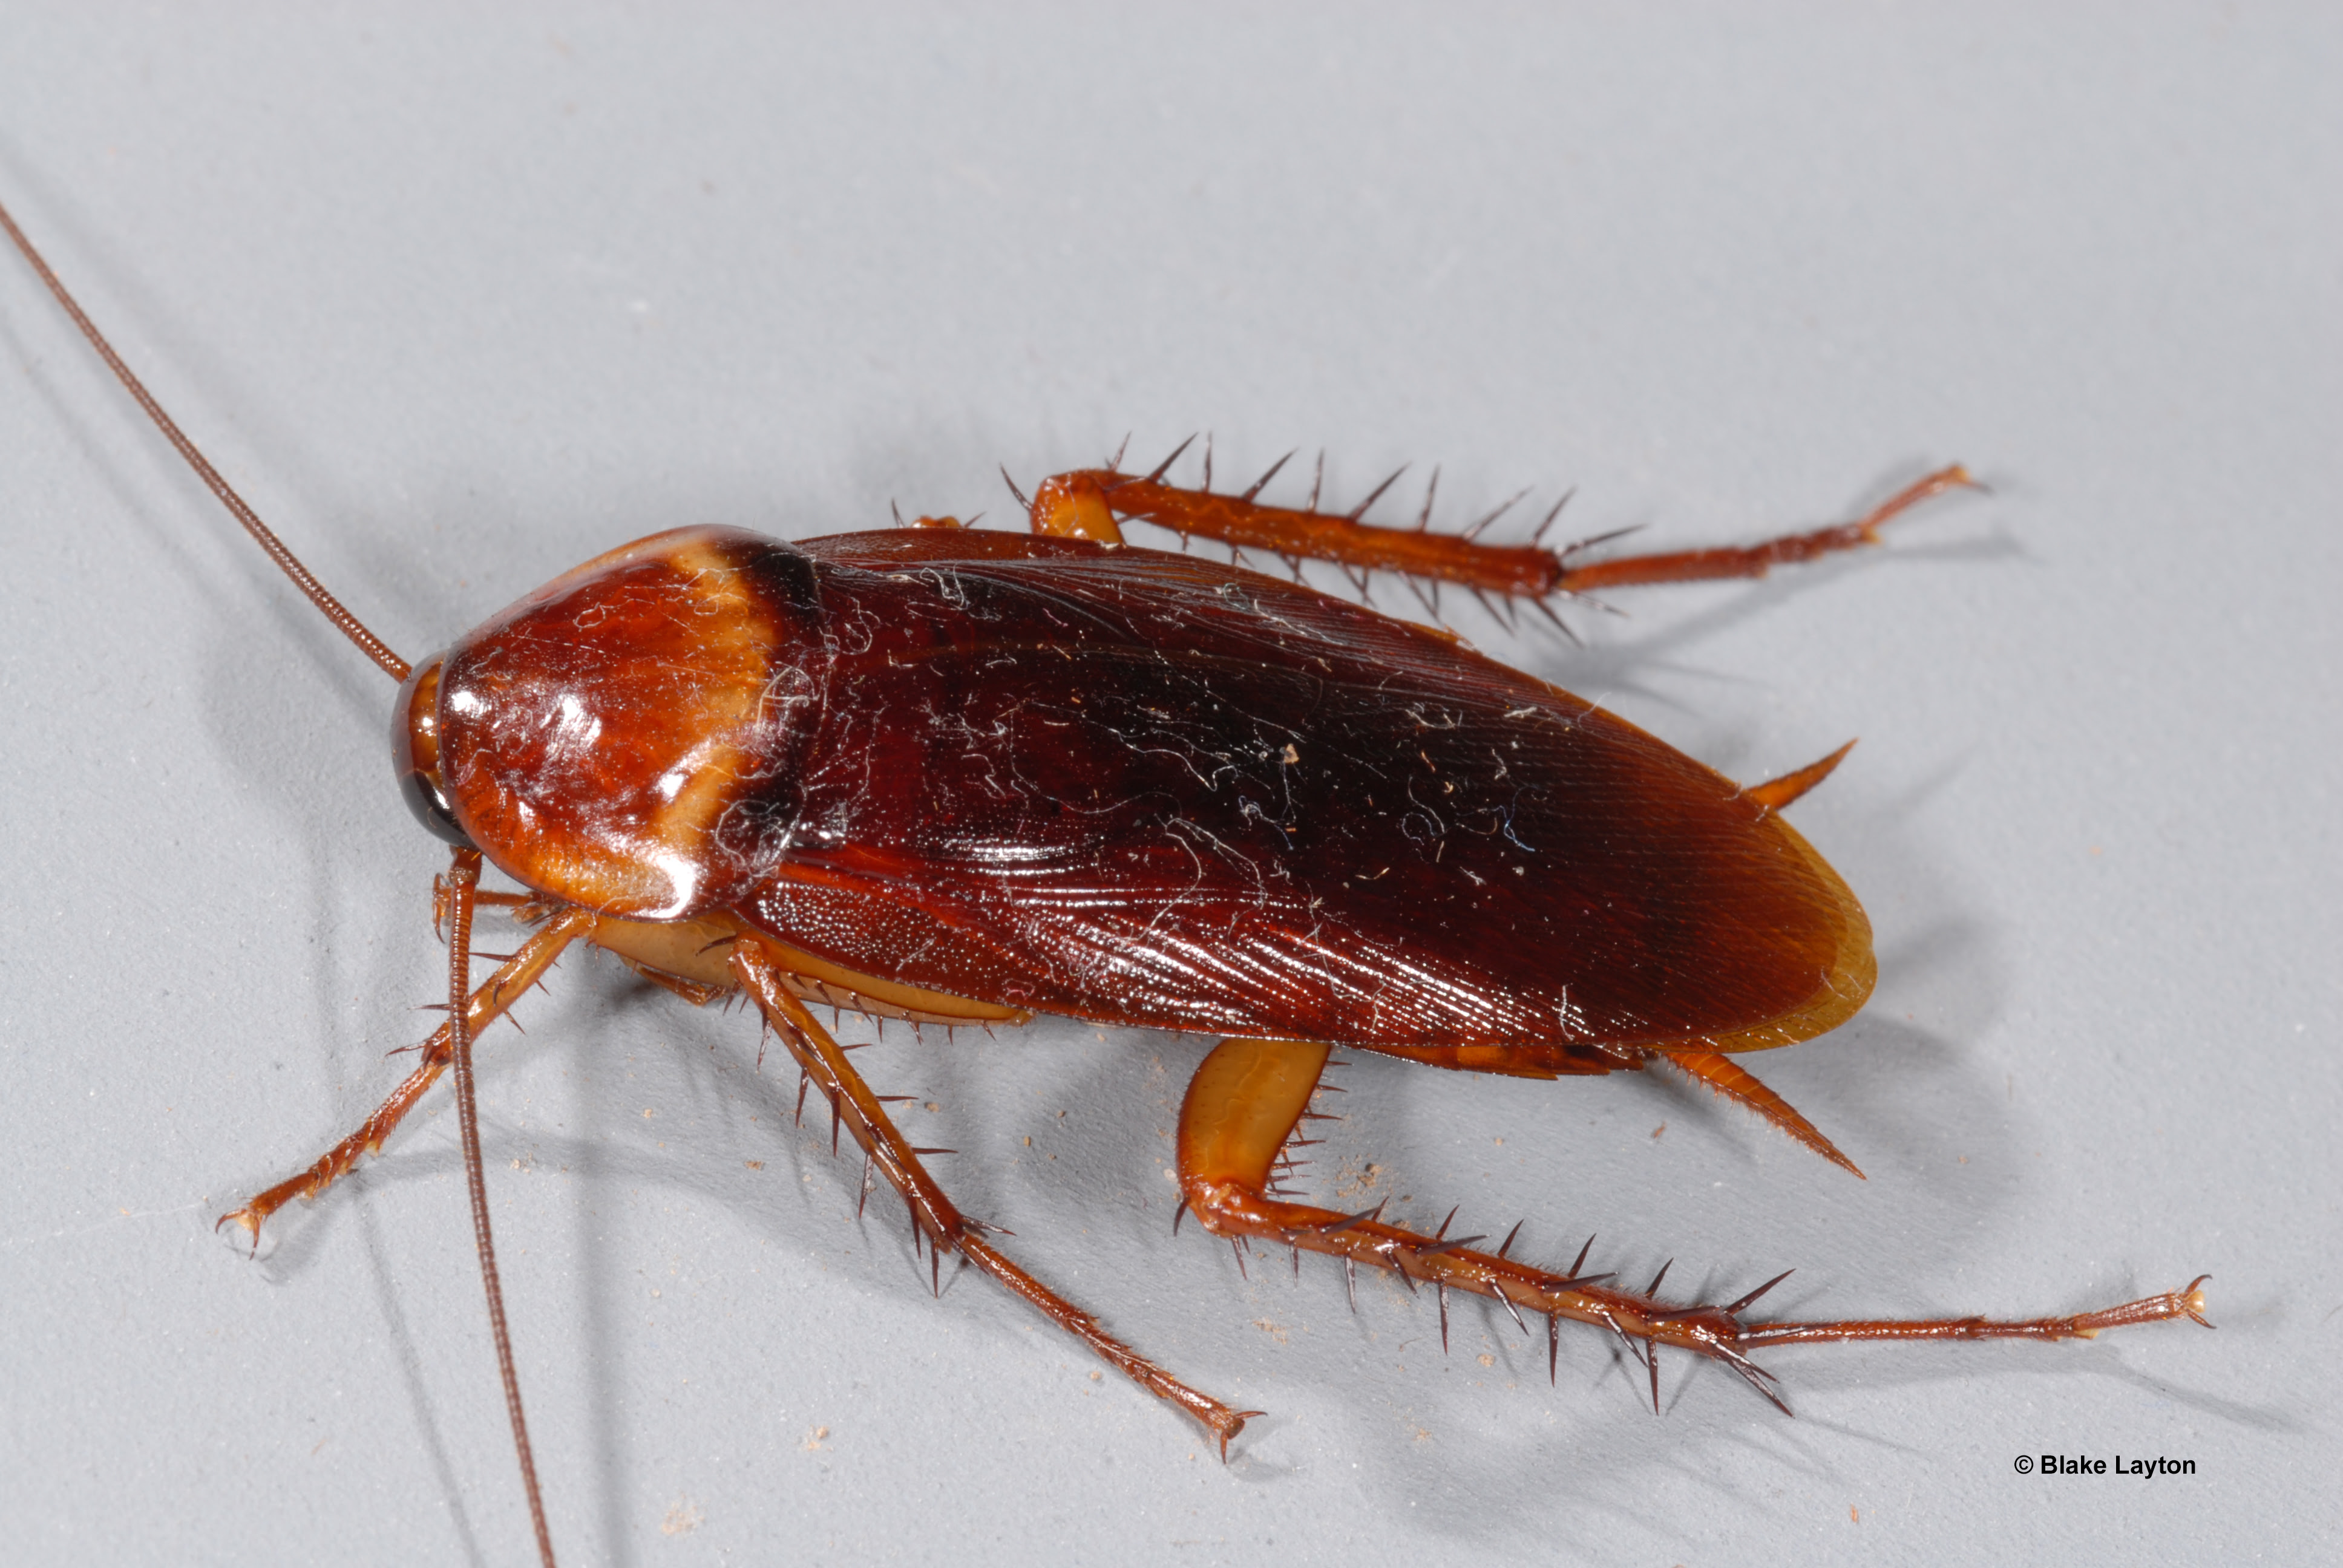 Brown roach with four visible legs and long whiskers.